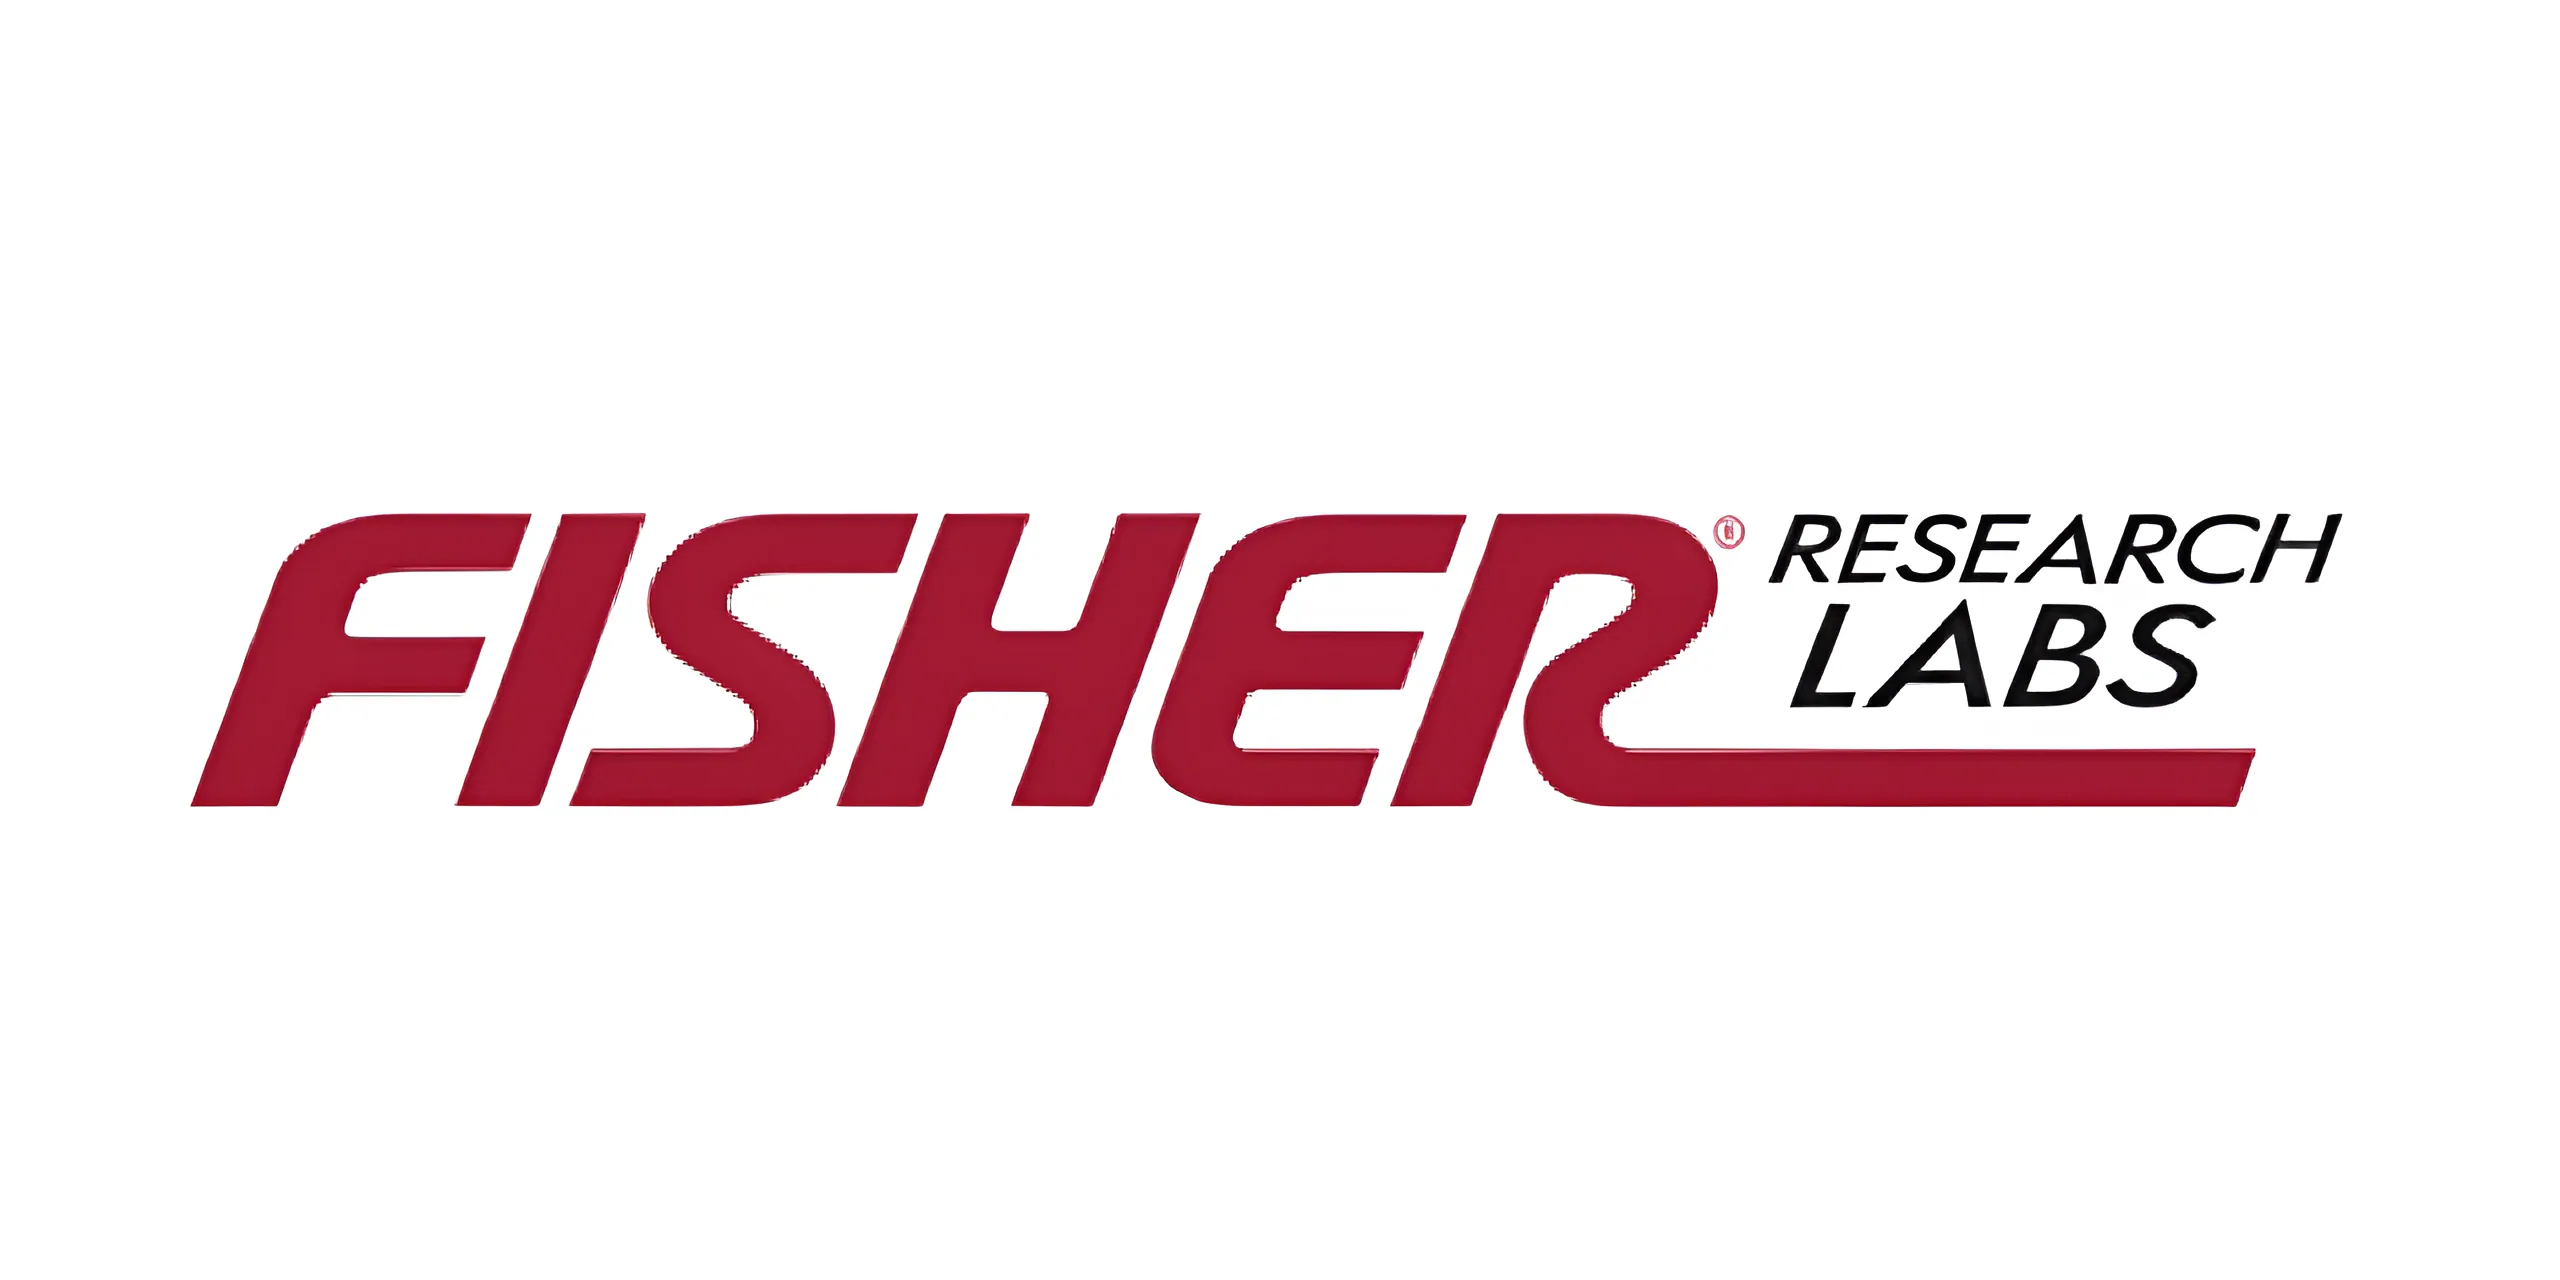 Fisher Research LABS Company's LOGO